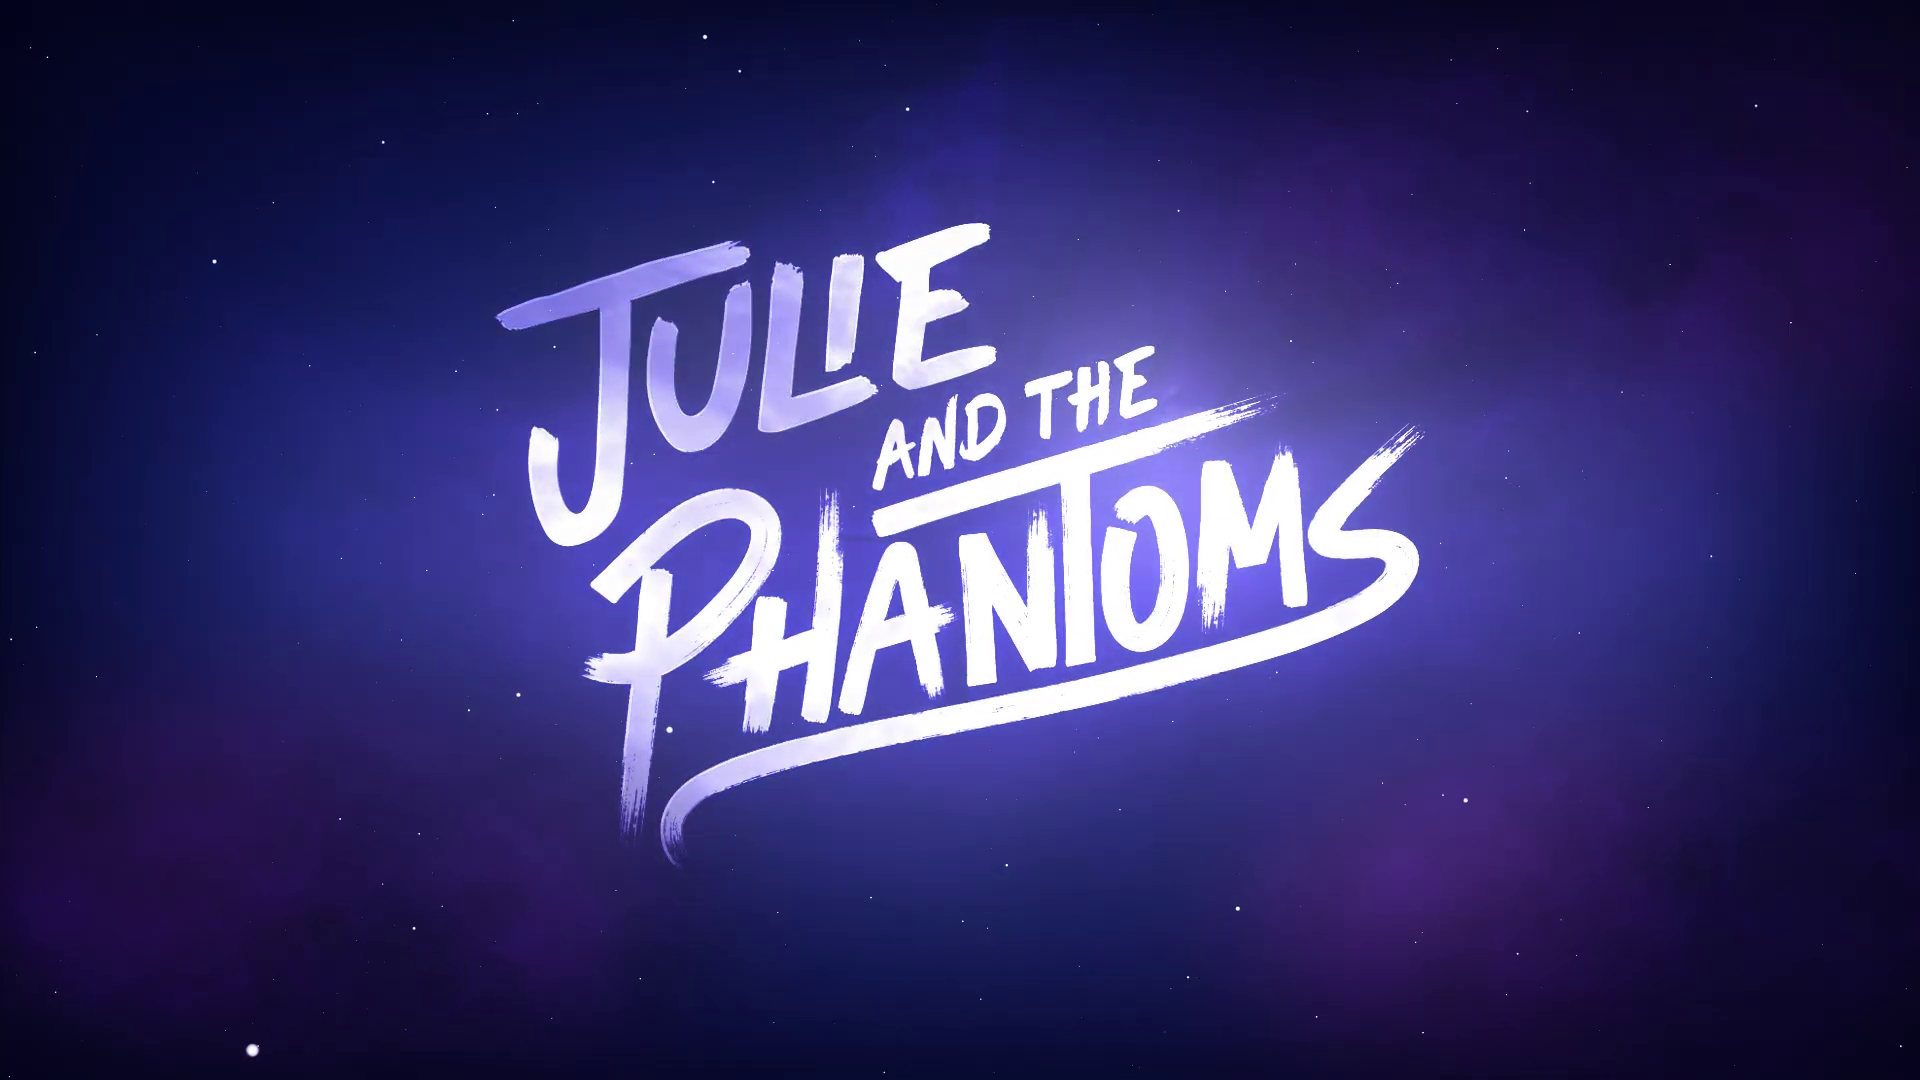 HD Julie and The Phantoms Wallpapers.